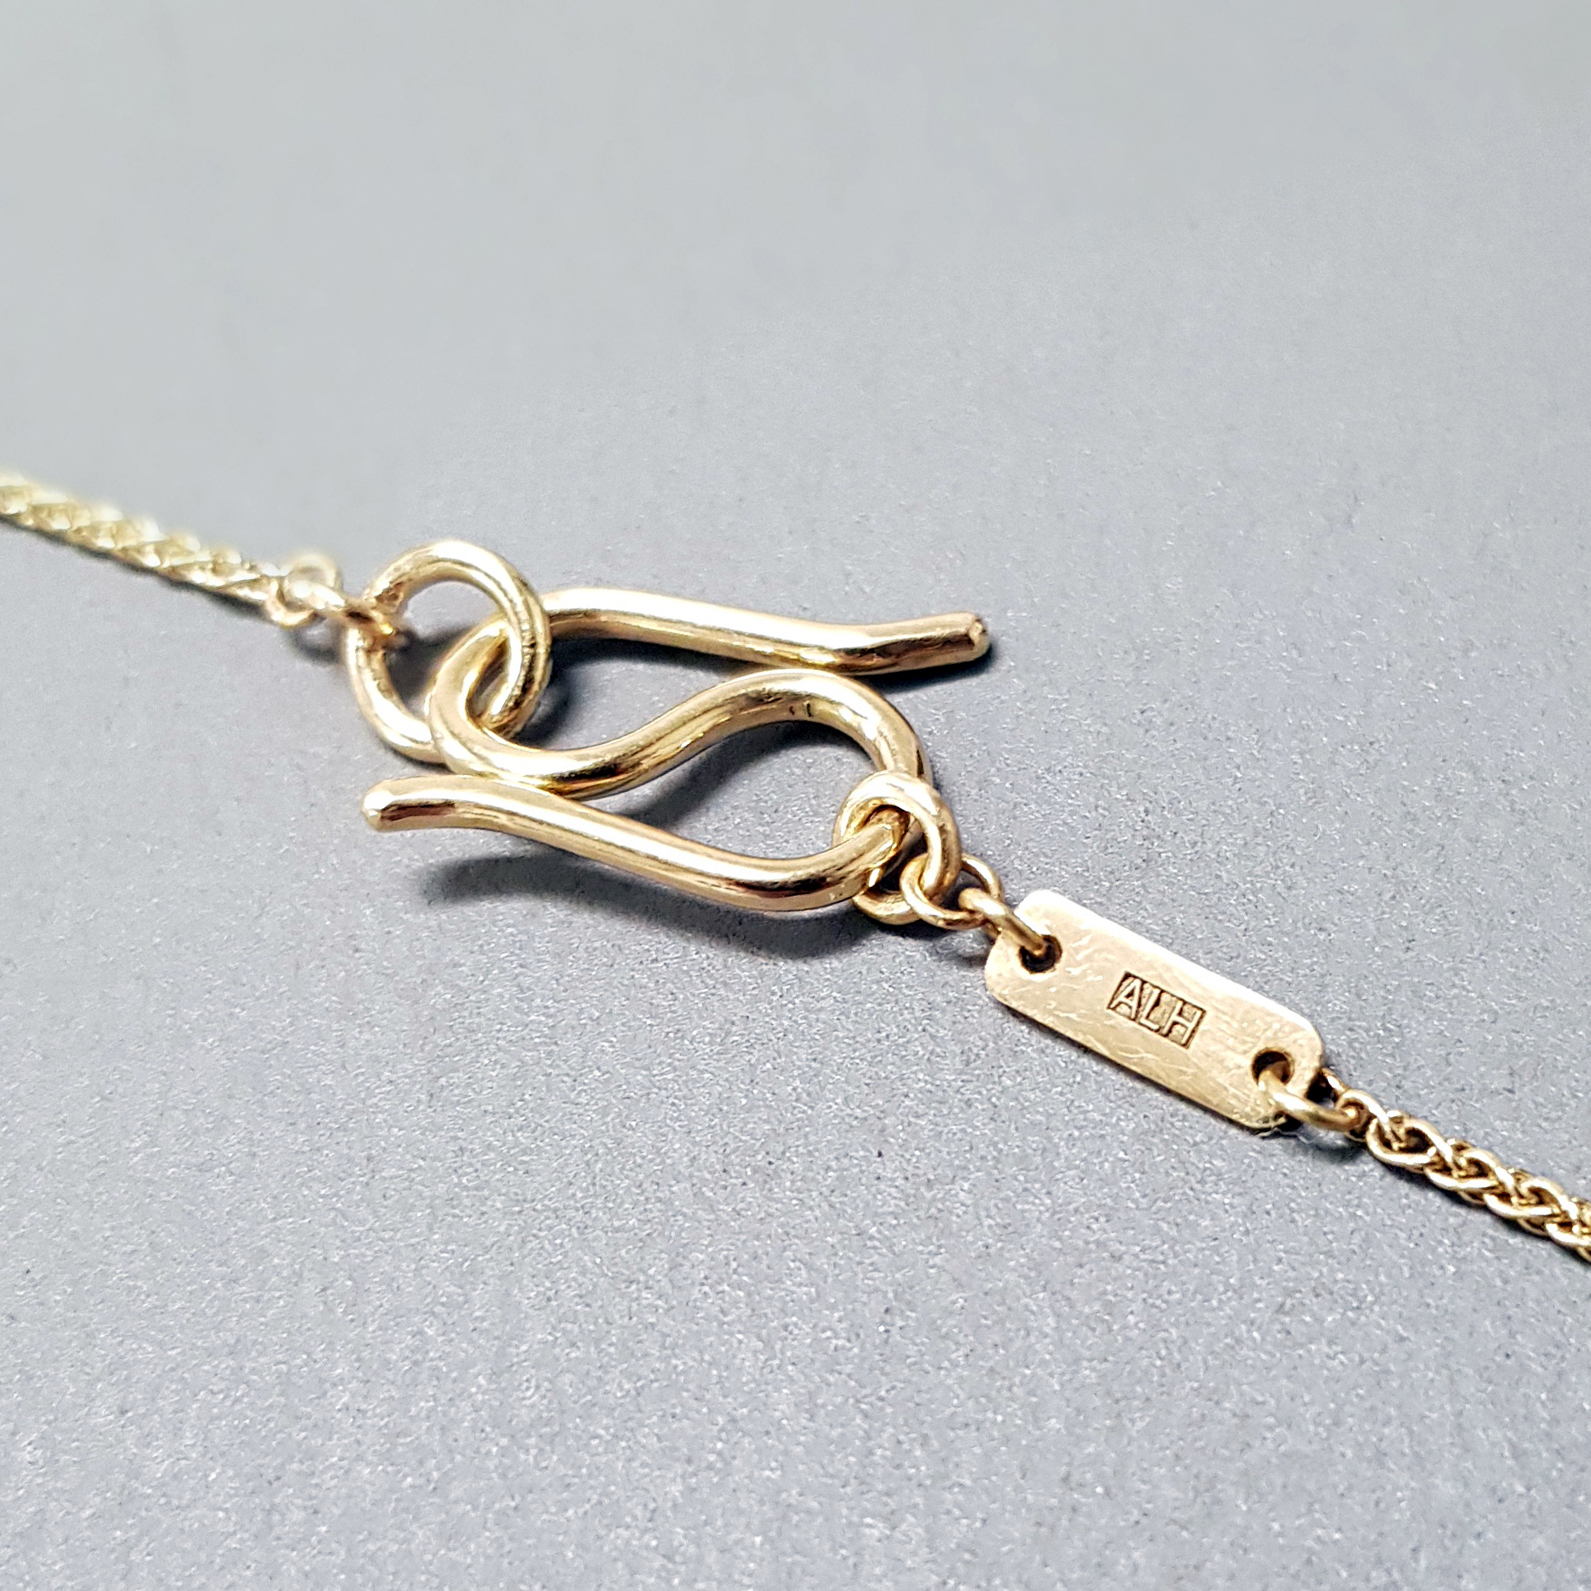 Handmade S clasp in 18k yellow gold with spiga chain on a grey background.